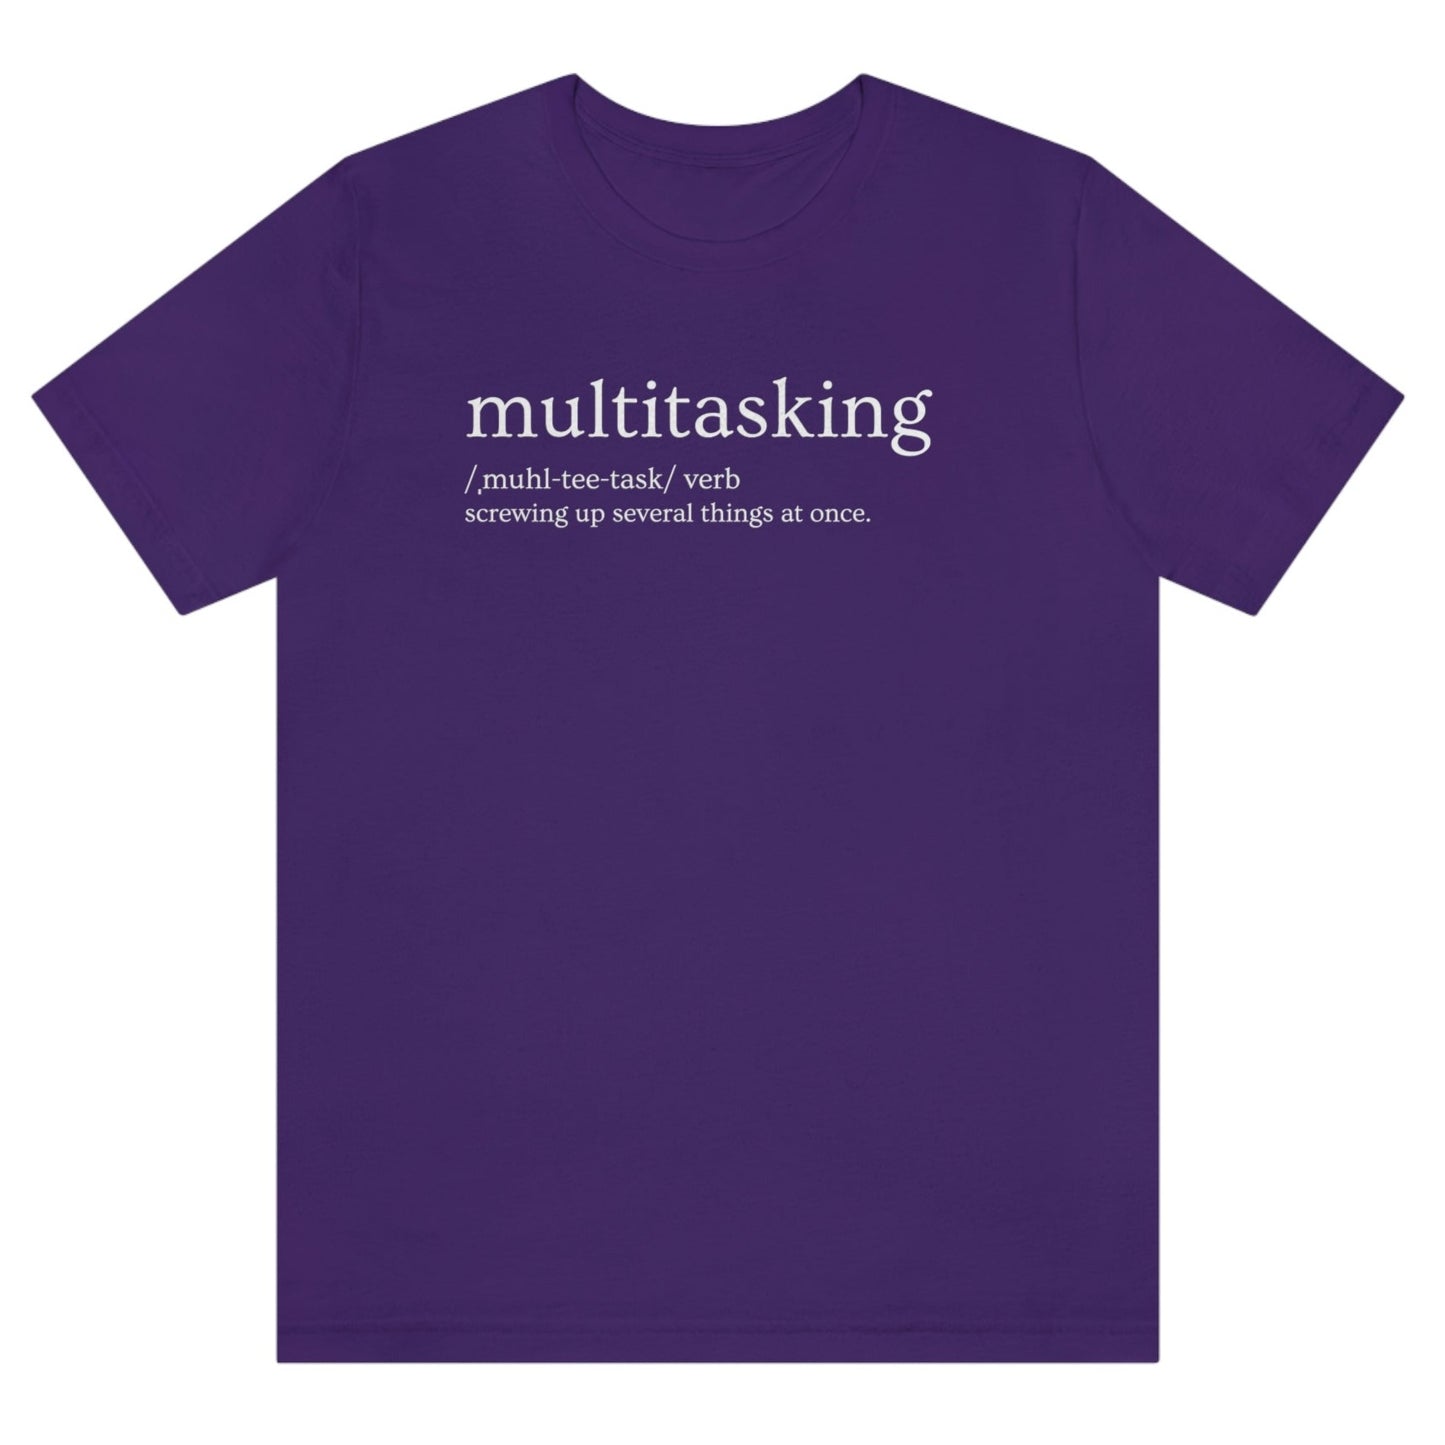 multitasking-screwing-up-several-things-at-once-team-purple-t-shirt